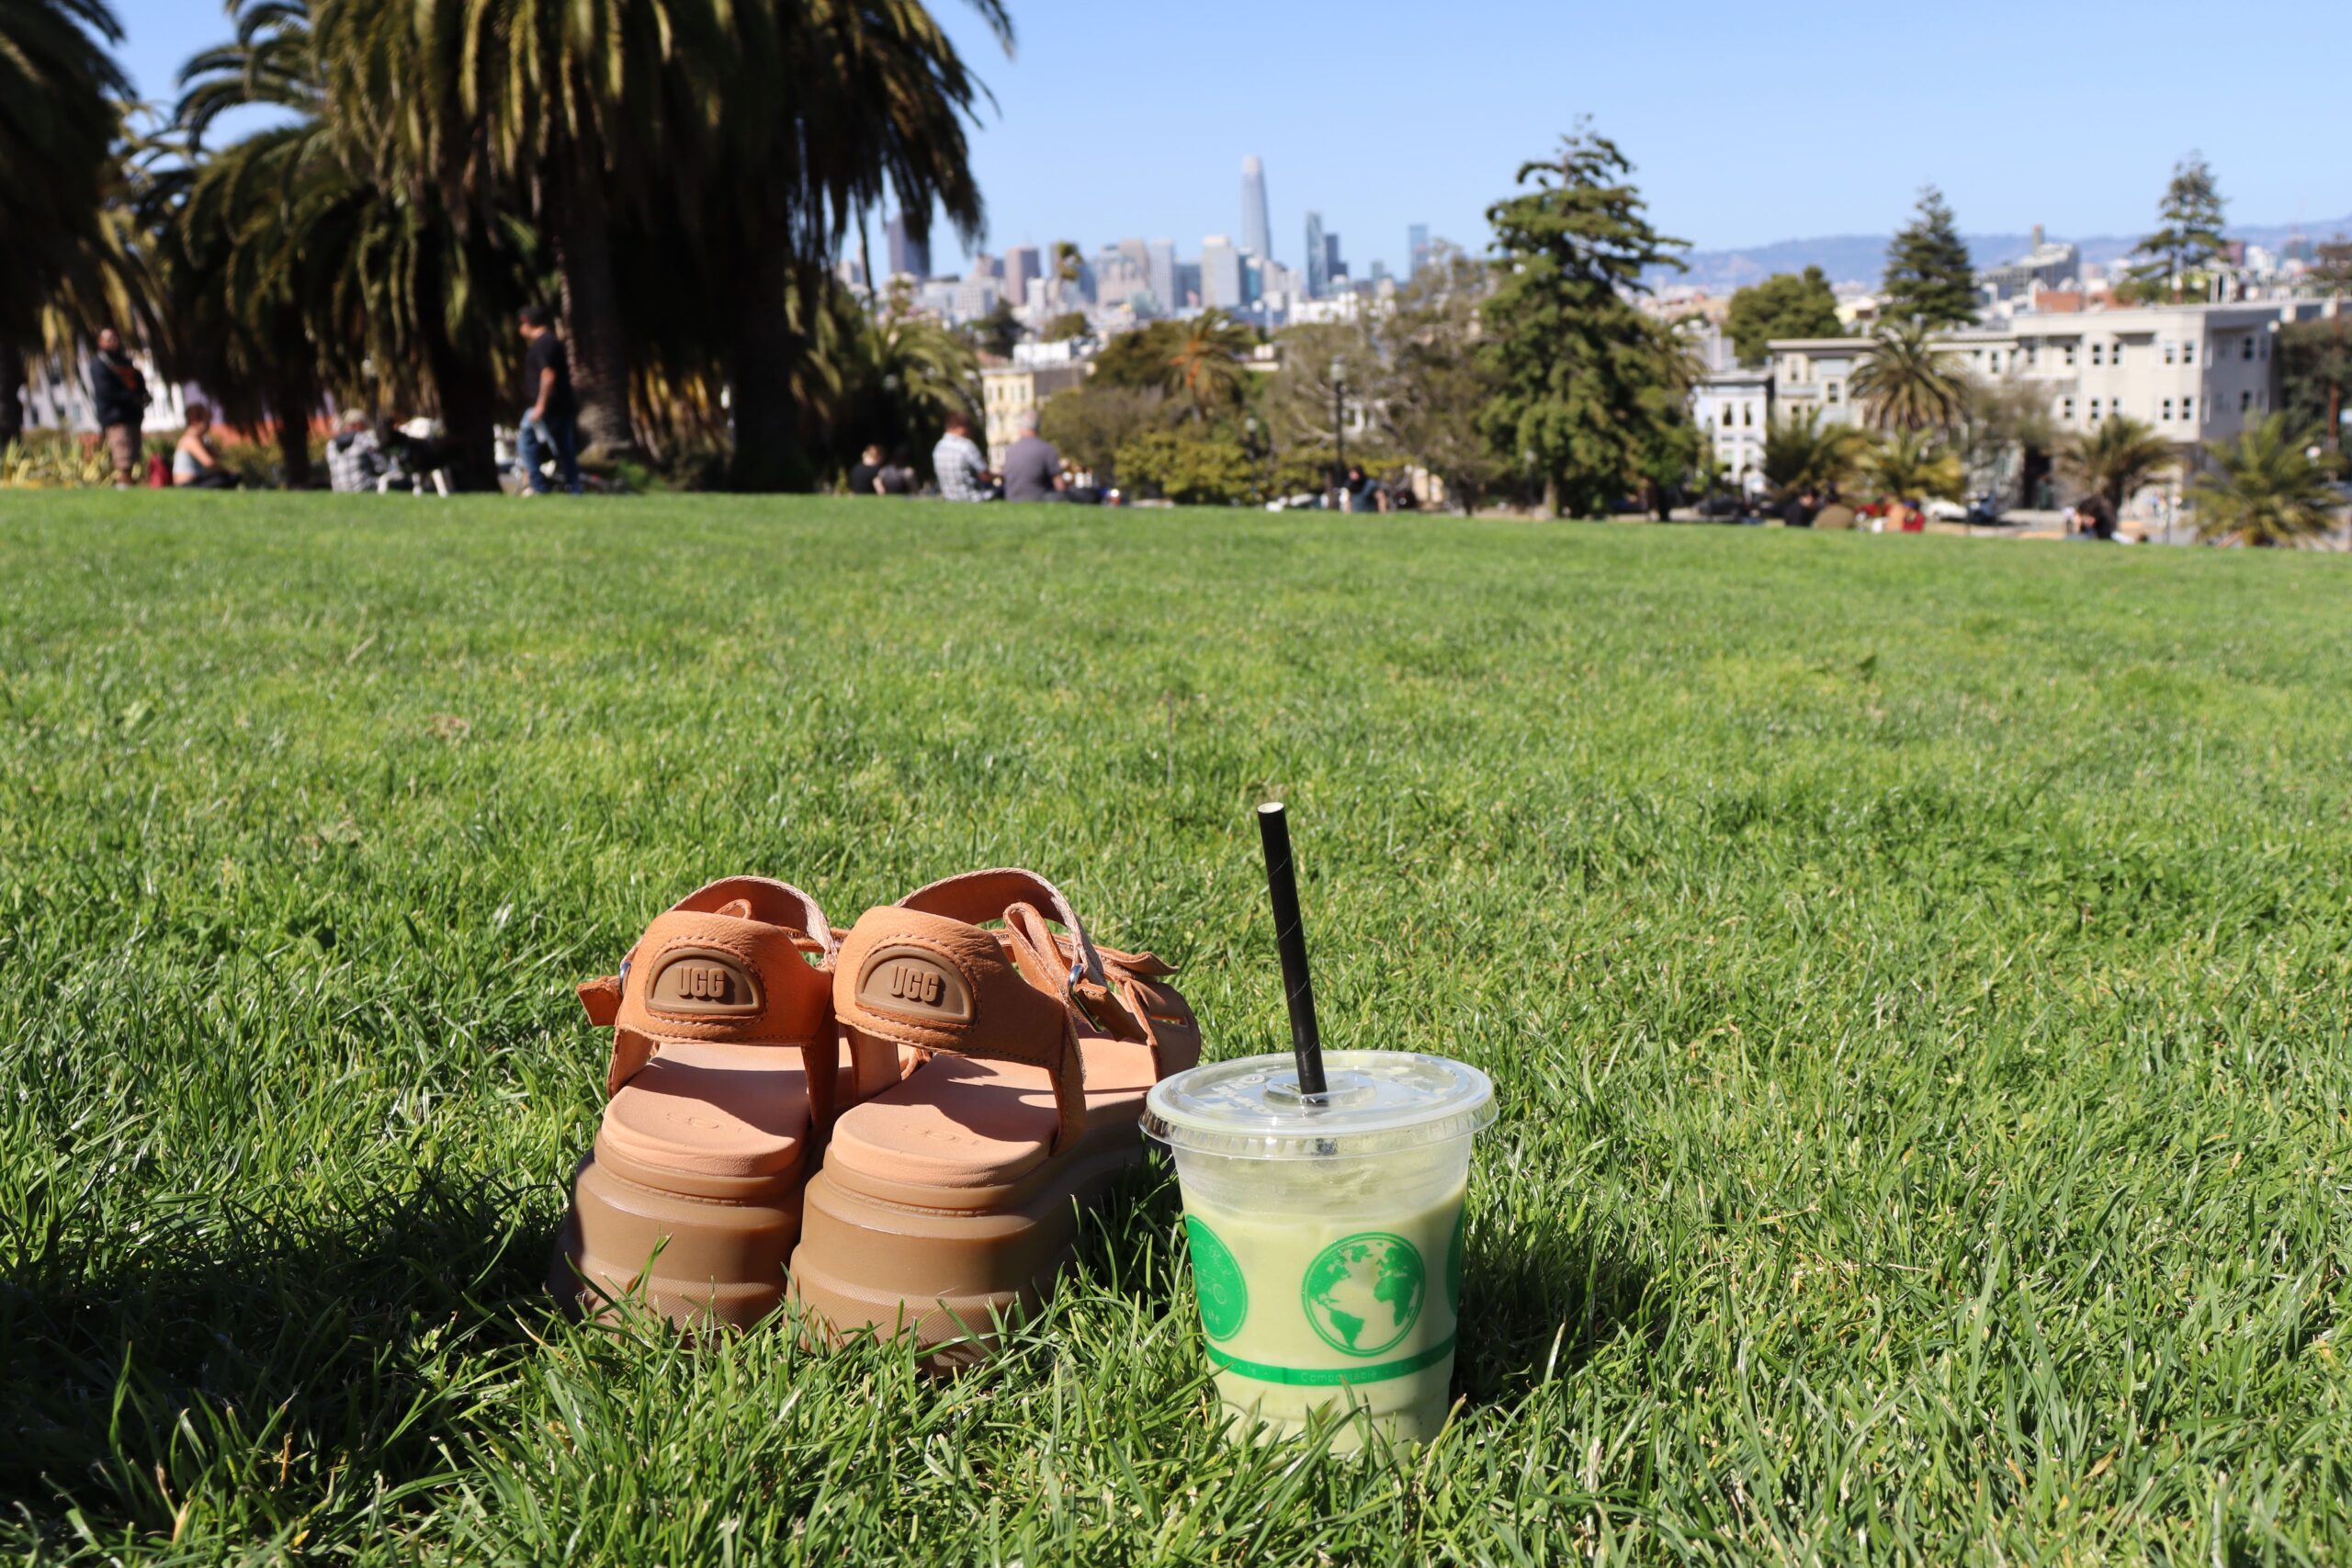 Shoes off and matcha latte in the grass at the Dolores Park in san Francisco.